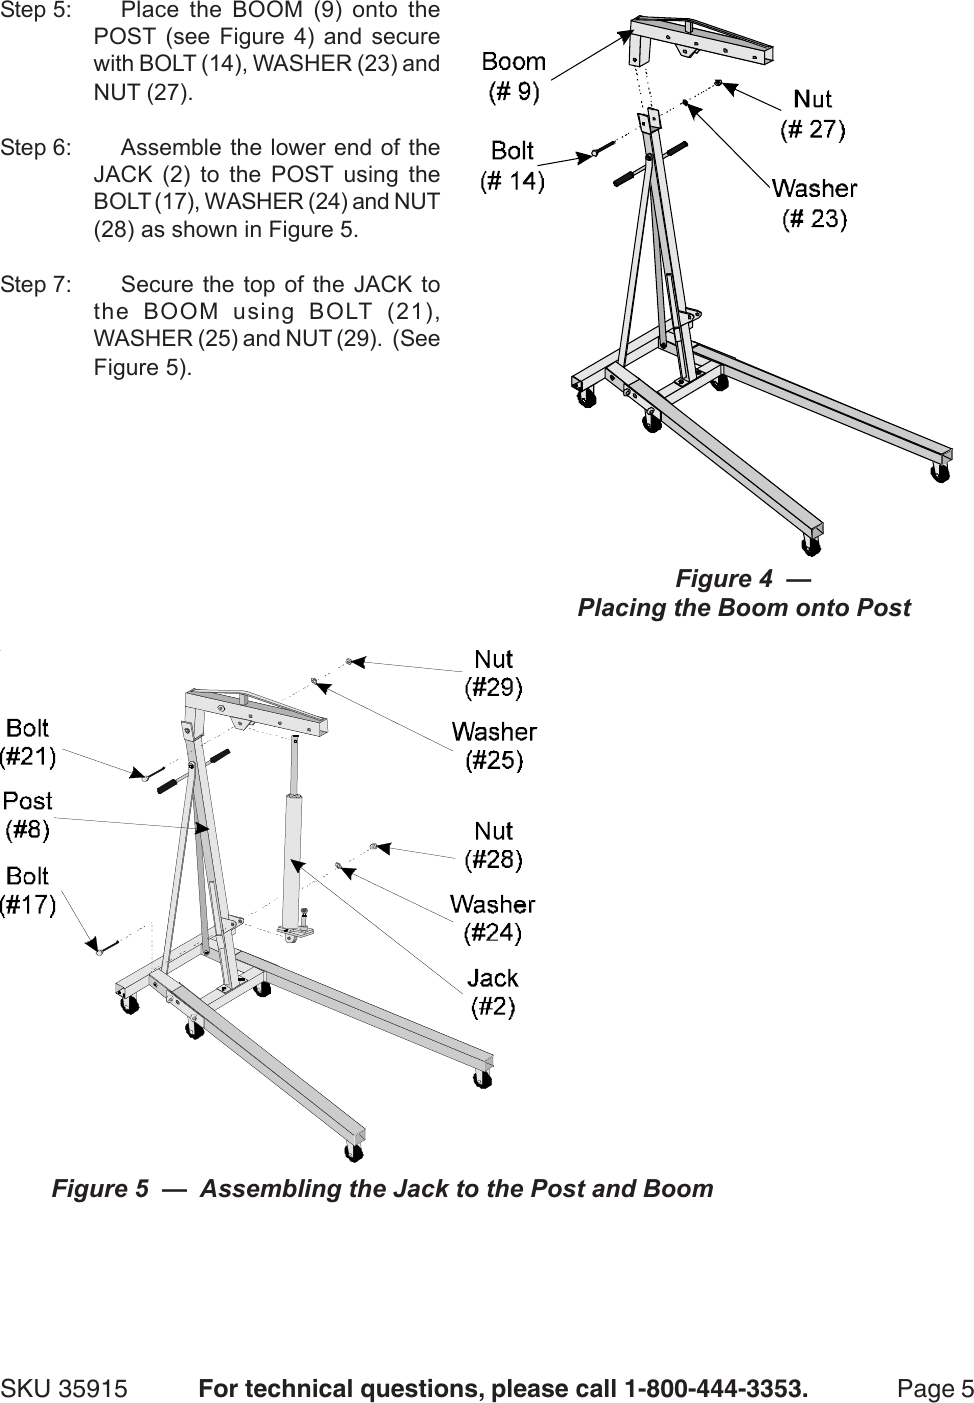 Page 5 of 11 - Central-Hydraulics Central-Hydraulics-2-Ton-Foldable-Shop-Crane-35915-Users-Manual- 35915 Jack Manual  Central-hydraulics-2-ton-foldable-shop-crane-35915-users-manual